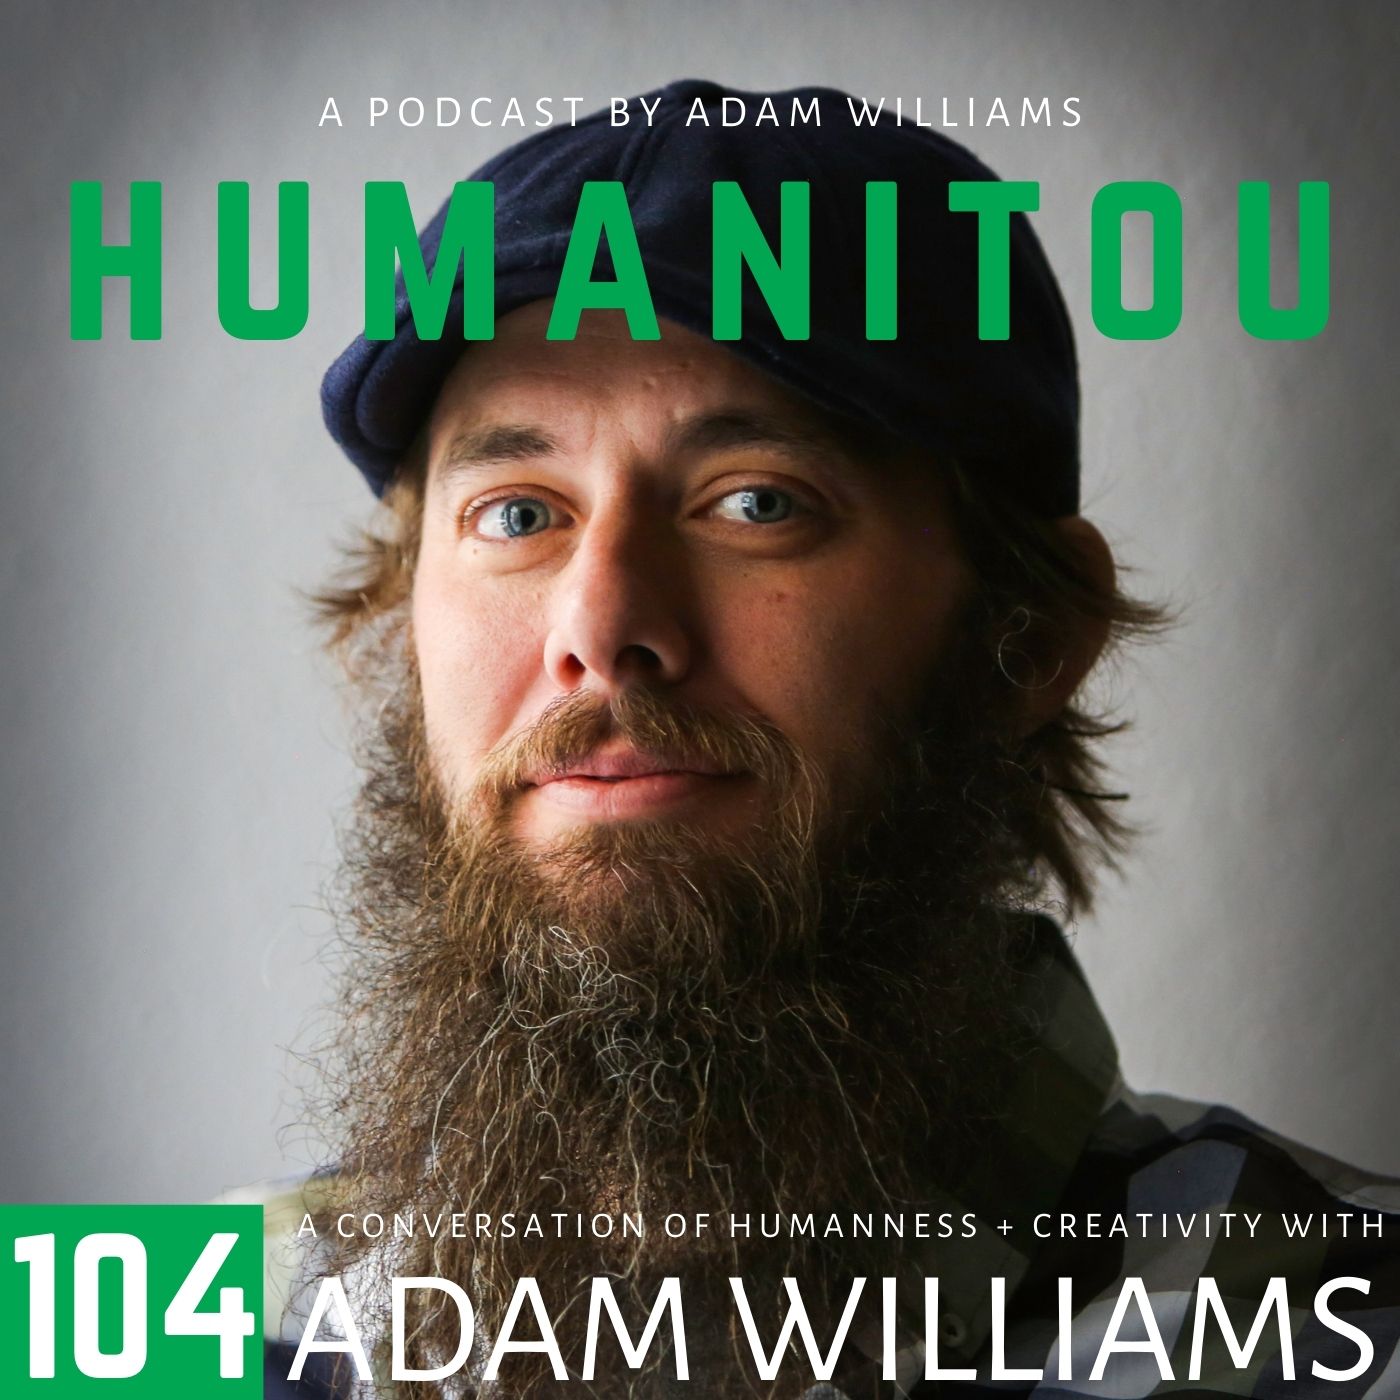 104: Adam Williams, on his fear of 'love', the nuances of karma, and healing our dis-ease and disconnections